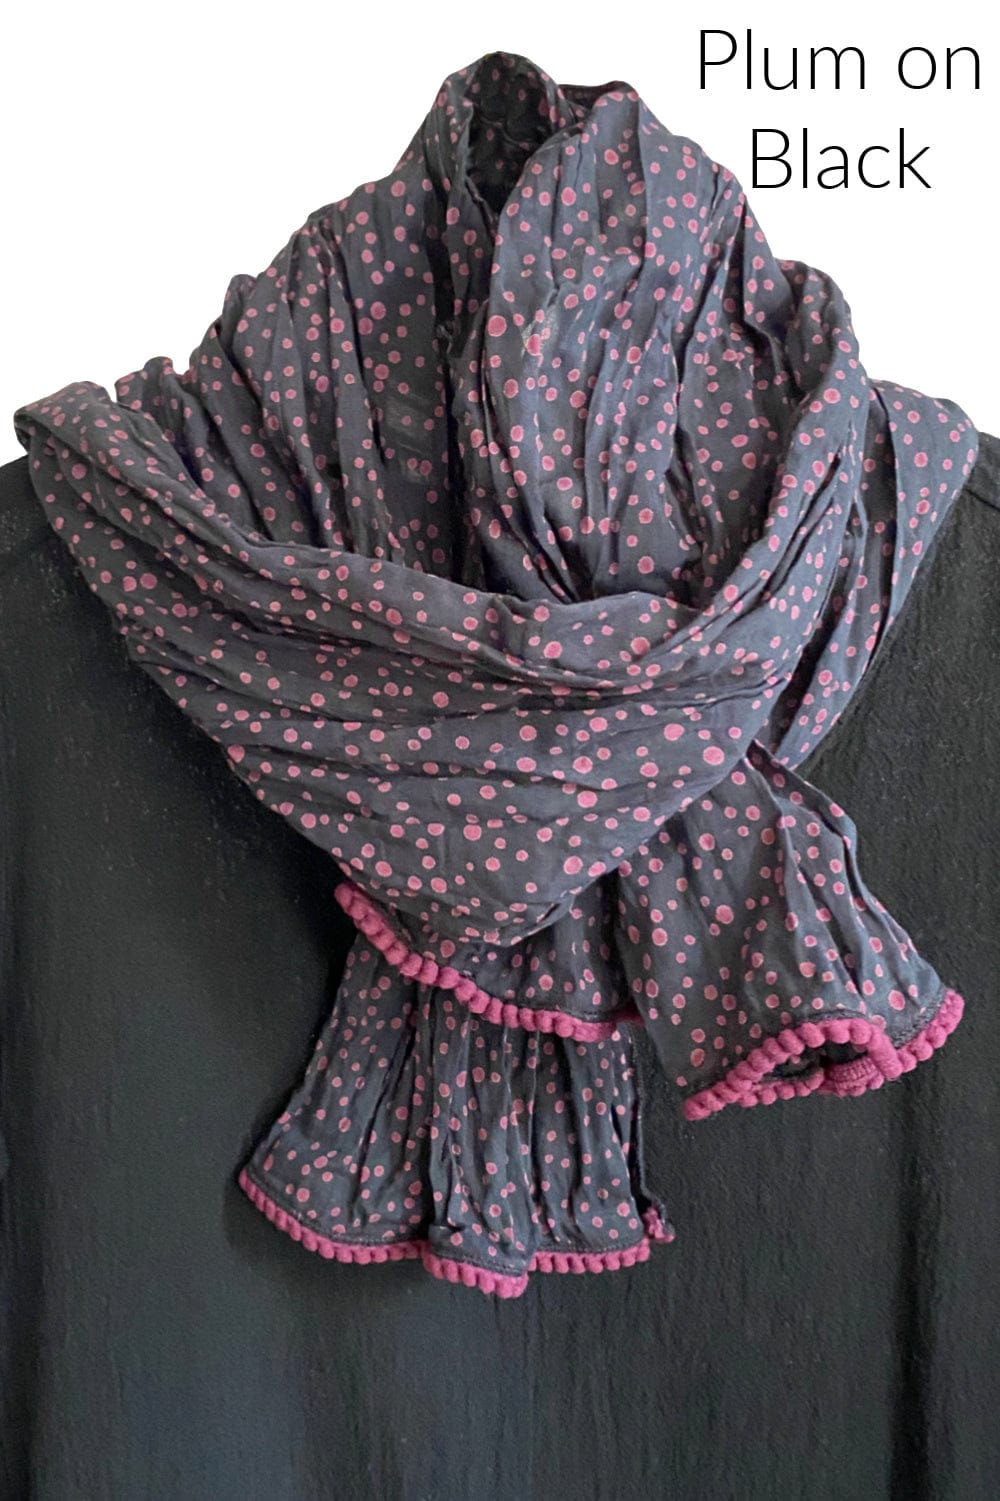 Pretty cotton scarf with plum dots and trim with a black background. print. Edges are trimmed little textured trim.